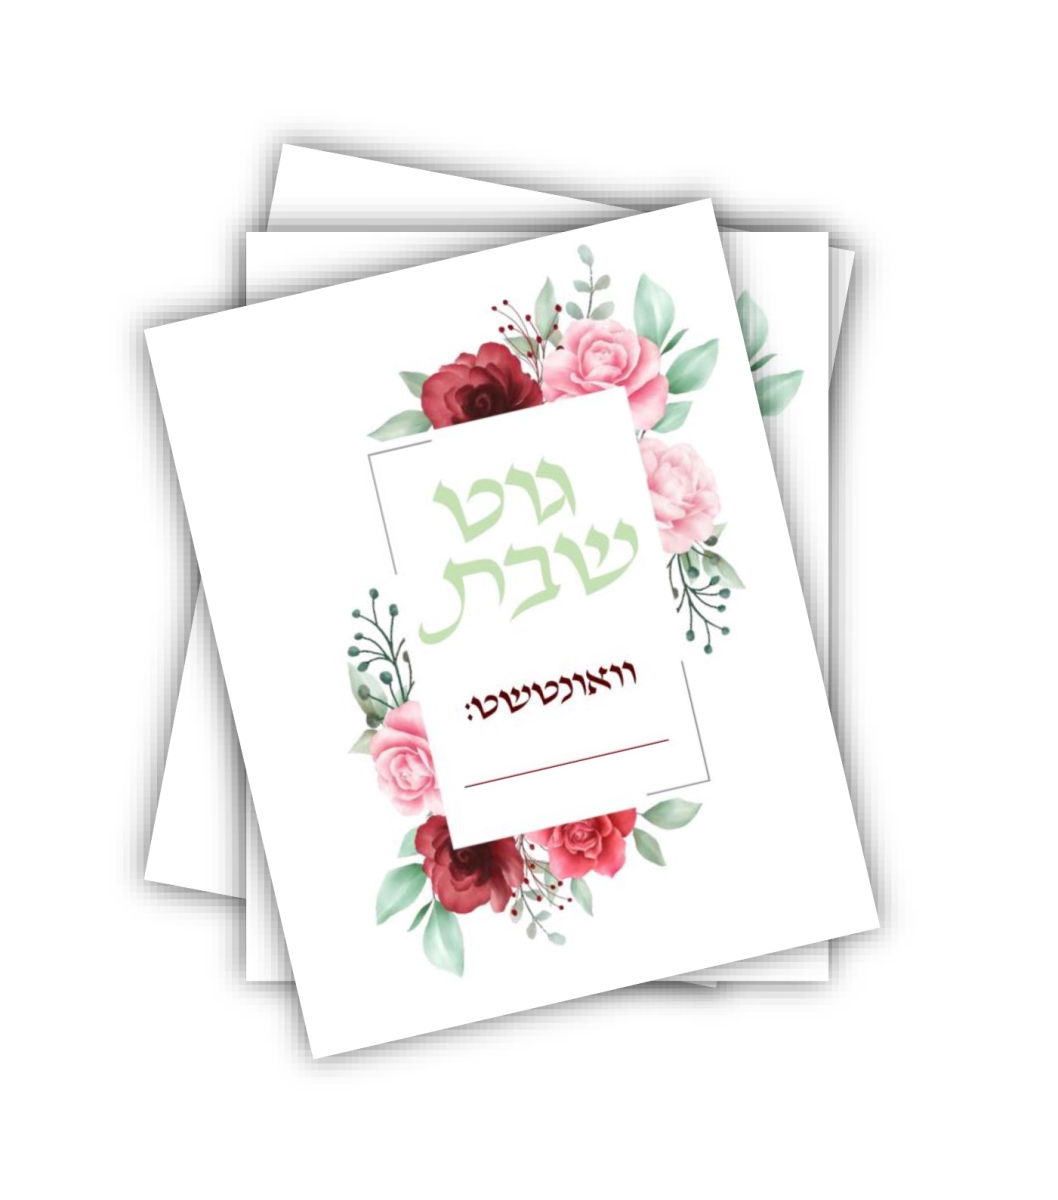 Picture of Mitzvah Friends F6217 4 x 2.5 in. Good Shabbos Small Card Tefilos - Pack of 5